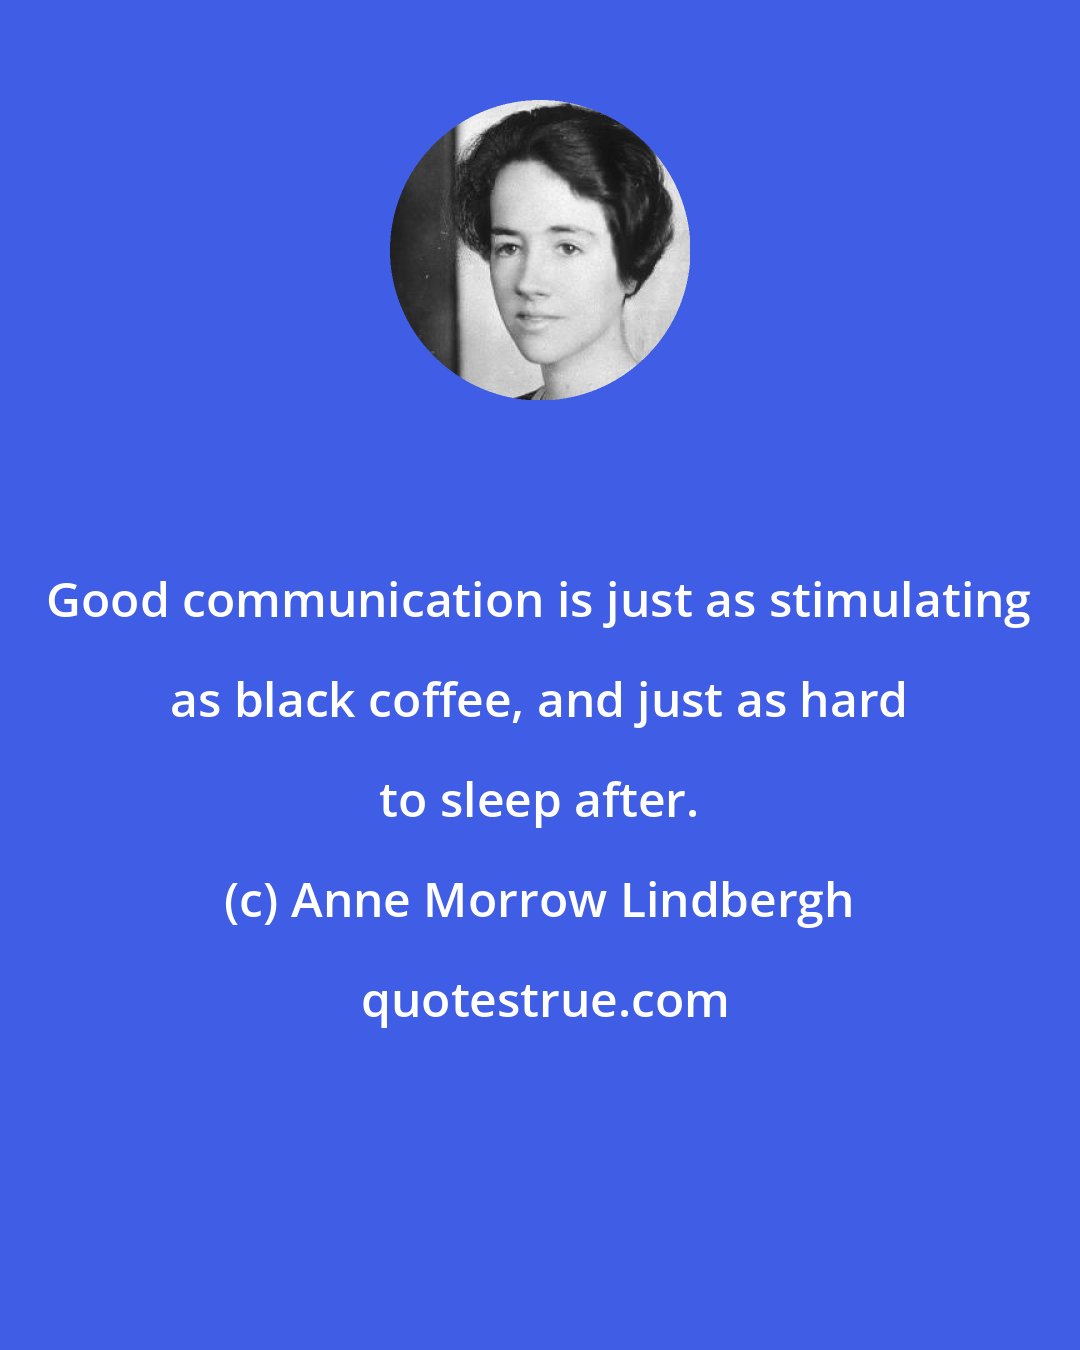 Anne Morrow Lindbergh: Good communication is just as stimulating as black coffee, and just as hard to sleep after.